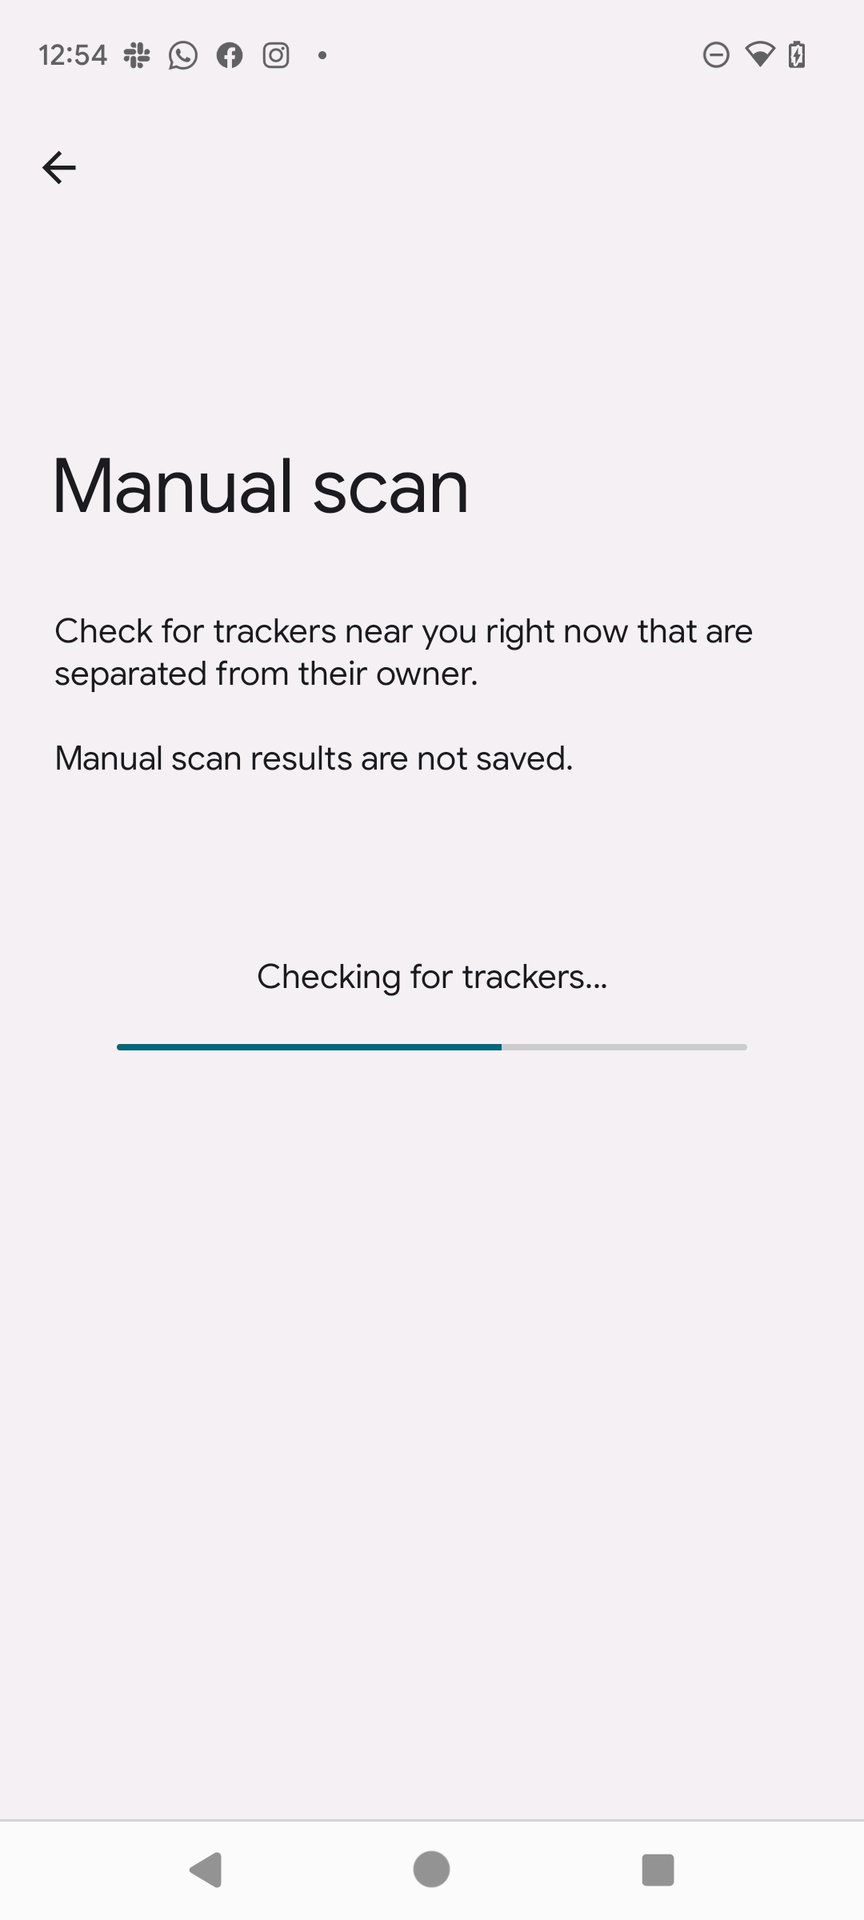 Android rolling out unknown tracker alerts to find AirTags